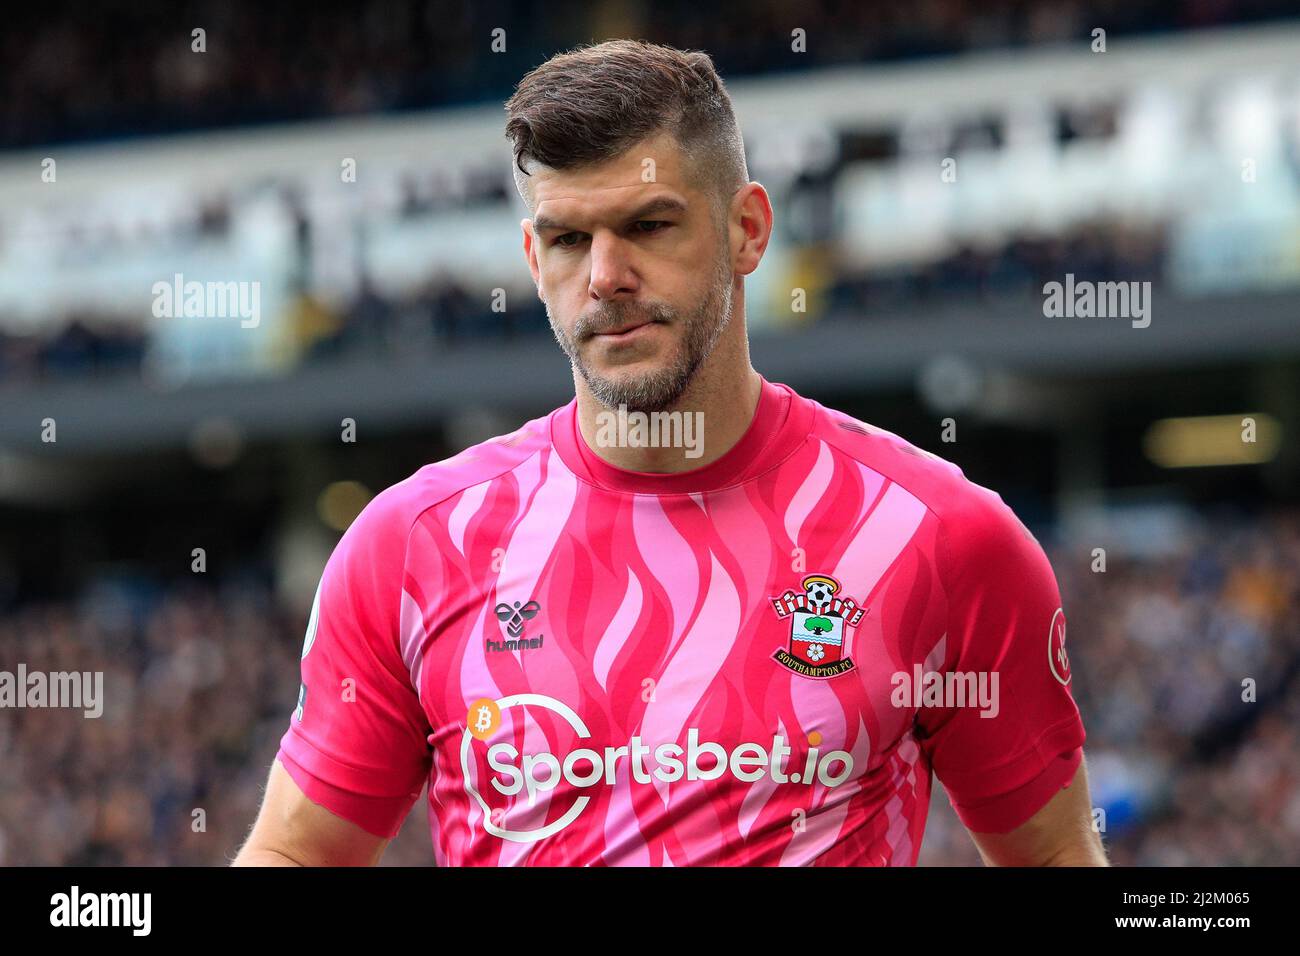 Fraser Forster #44 of Southampton during the game Stock Photo